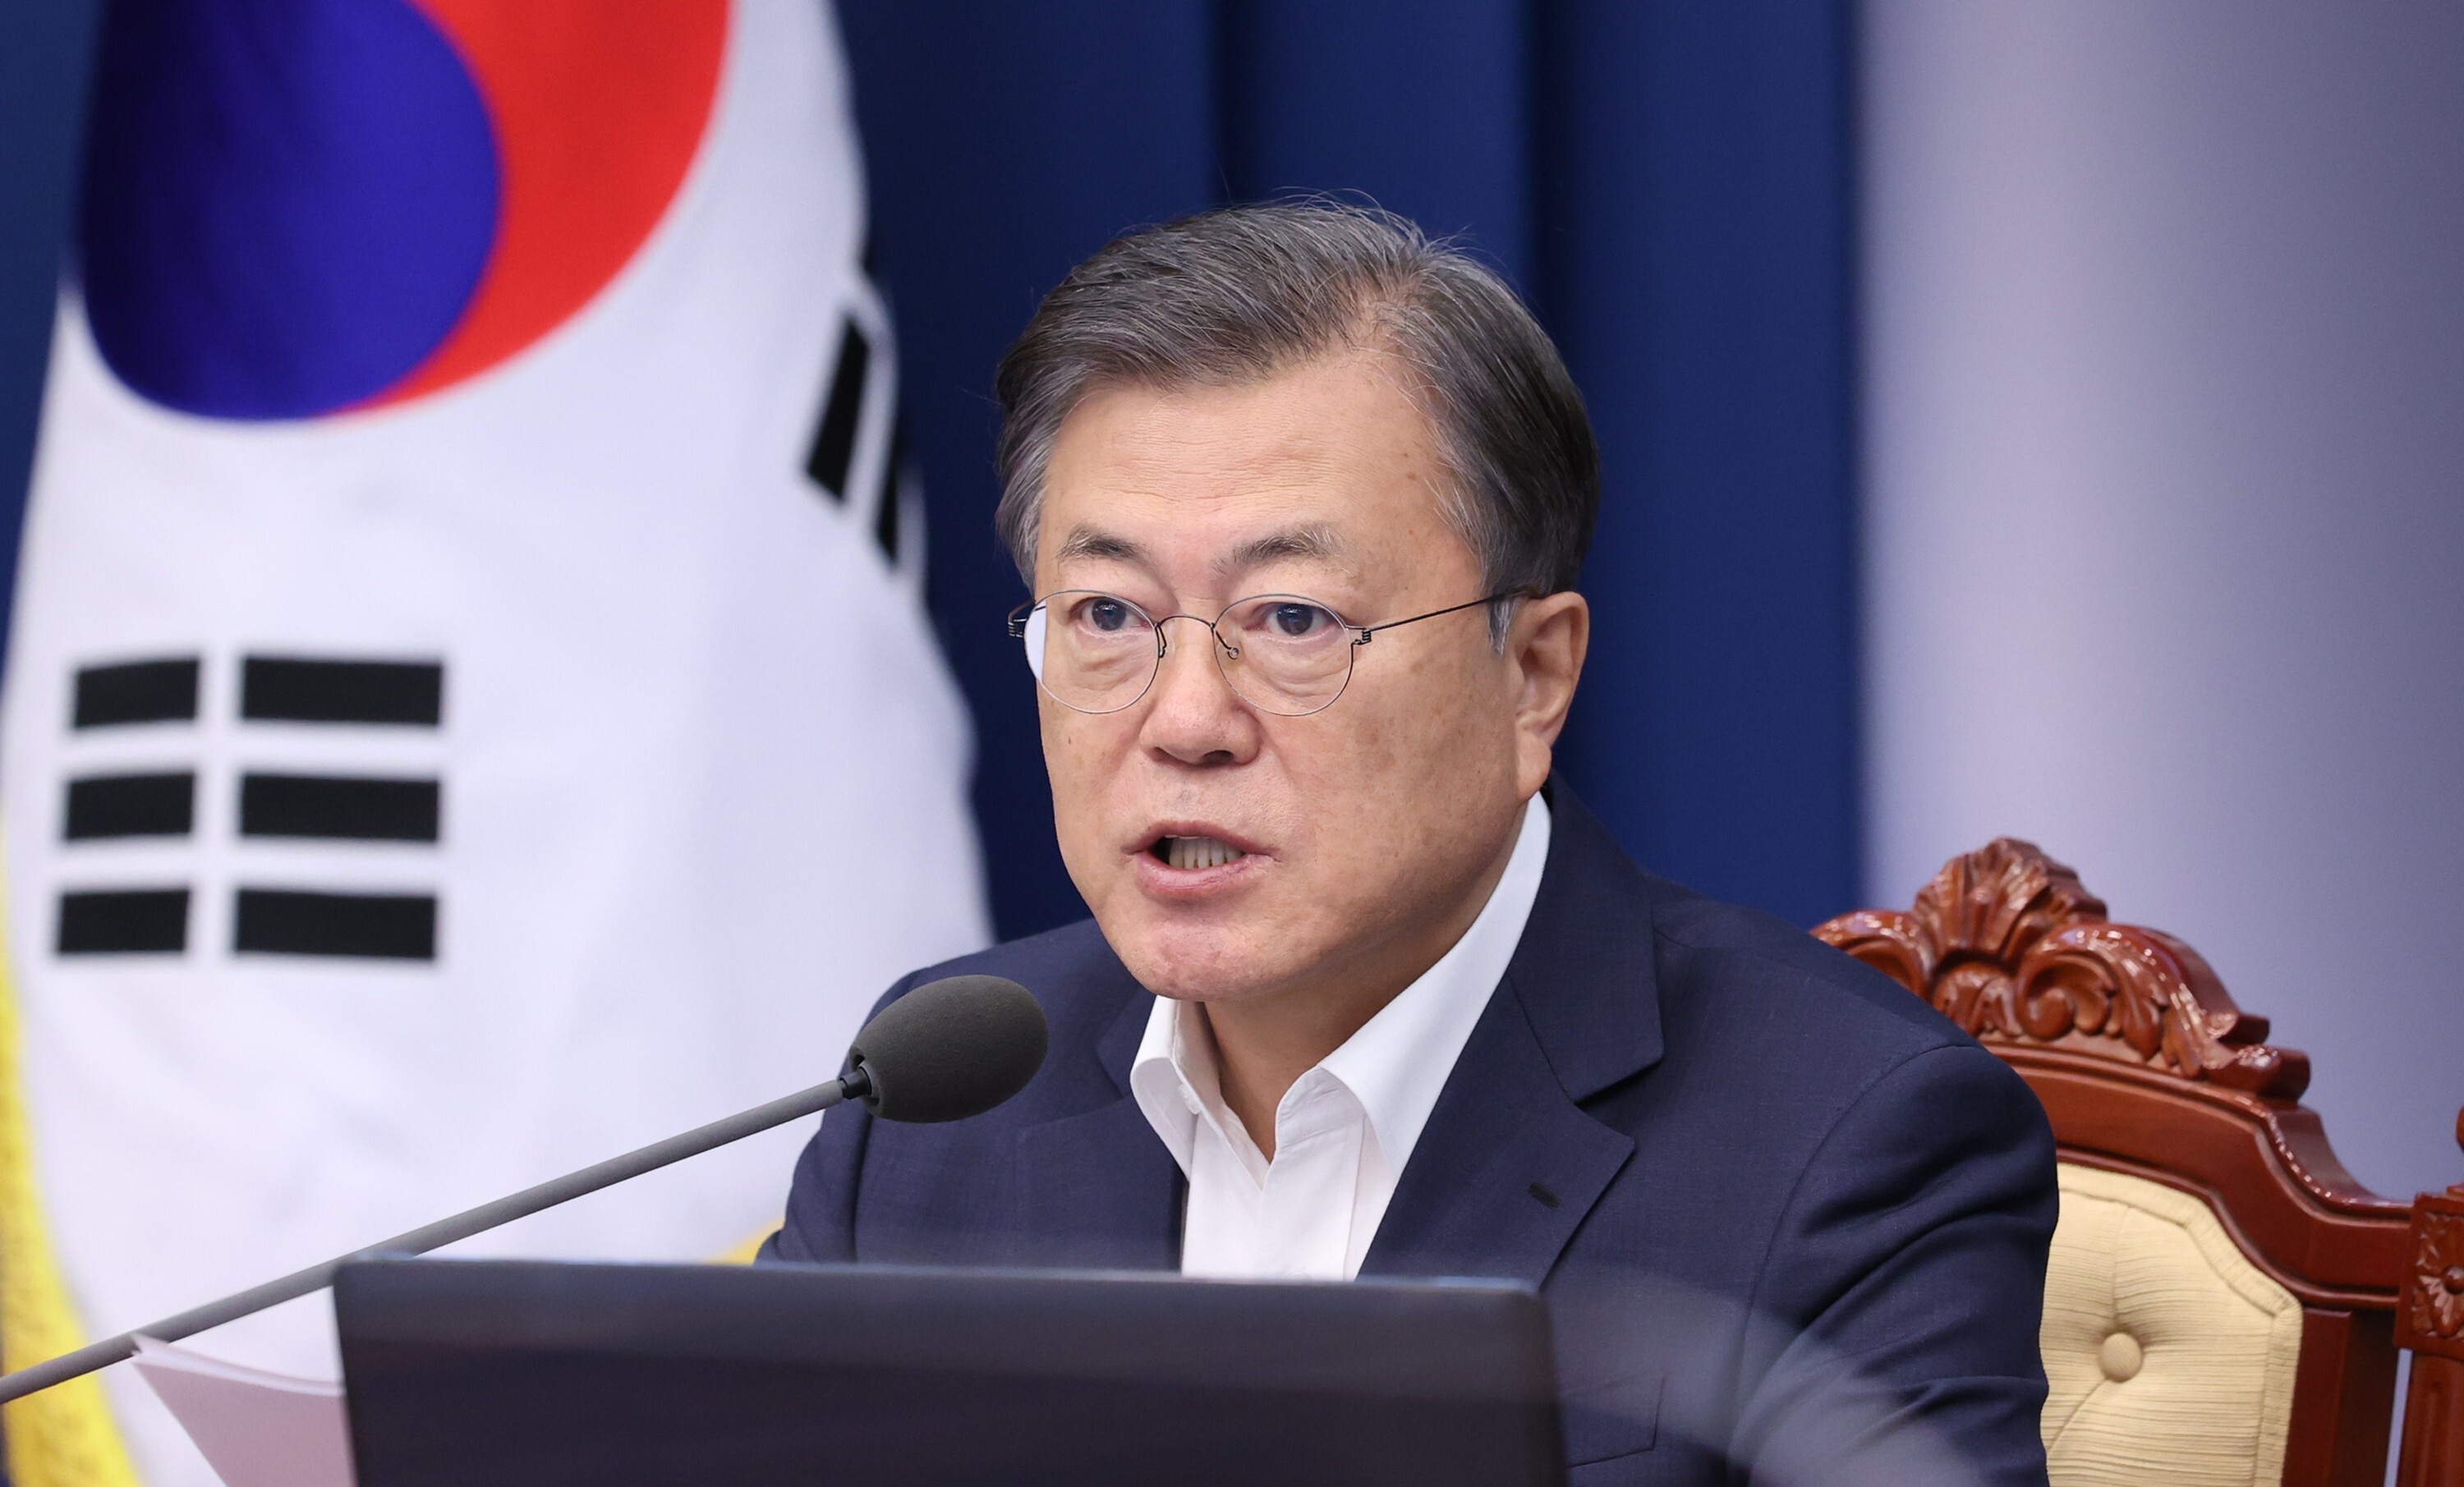 President Moon Jae-in has set an objective of elevating relations with Asean on par with South Korea’s four major partners – the United States, China, Russia and Japan. Photo: DPA